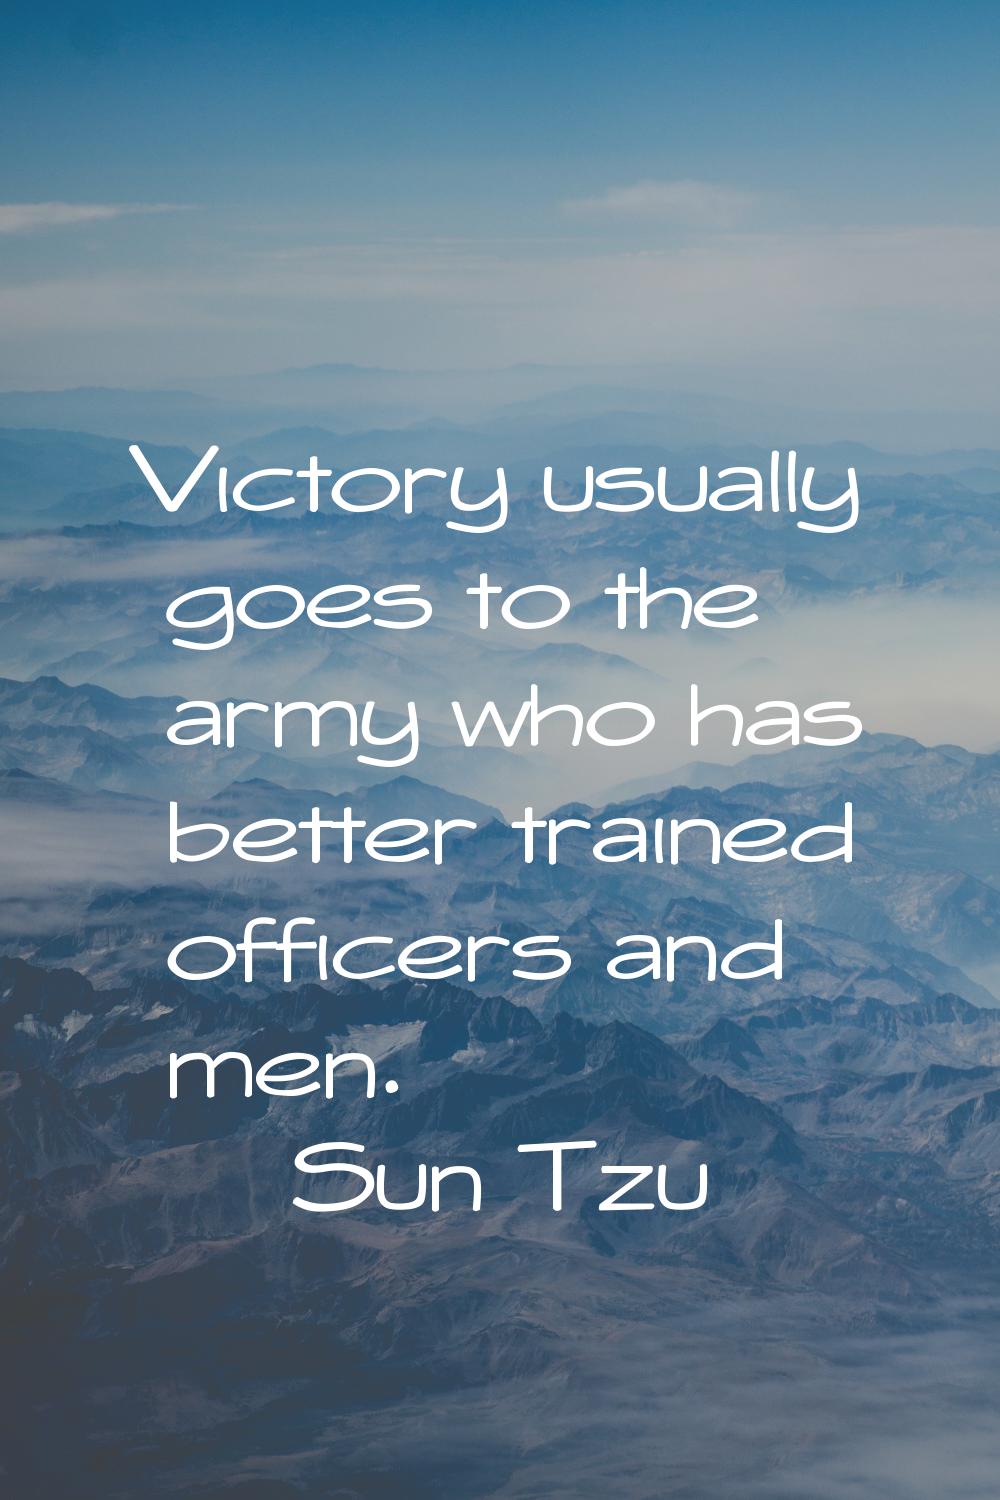 Victory usually goes to the army who has better trained officers and men.